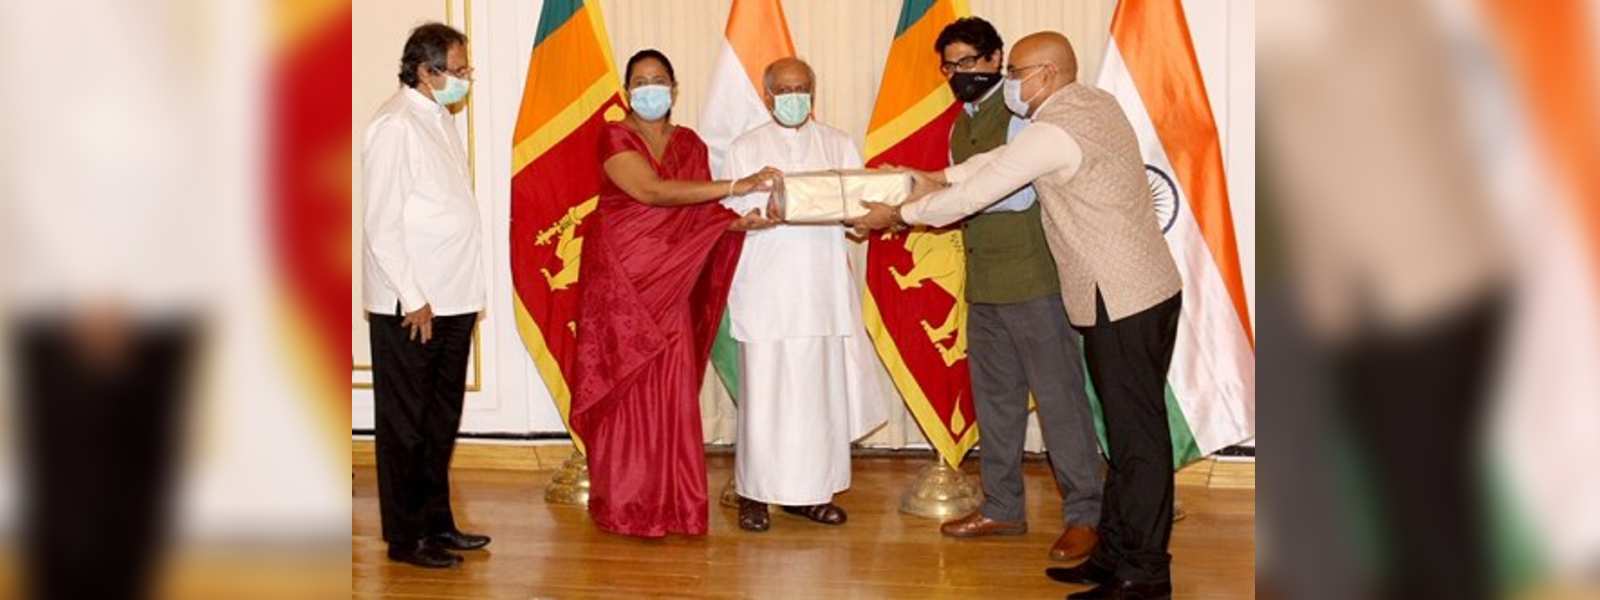 India donates the 4th consignment of essential medicine and medical items